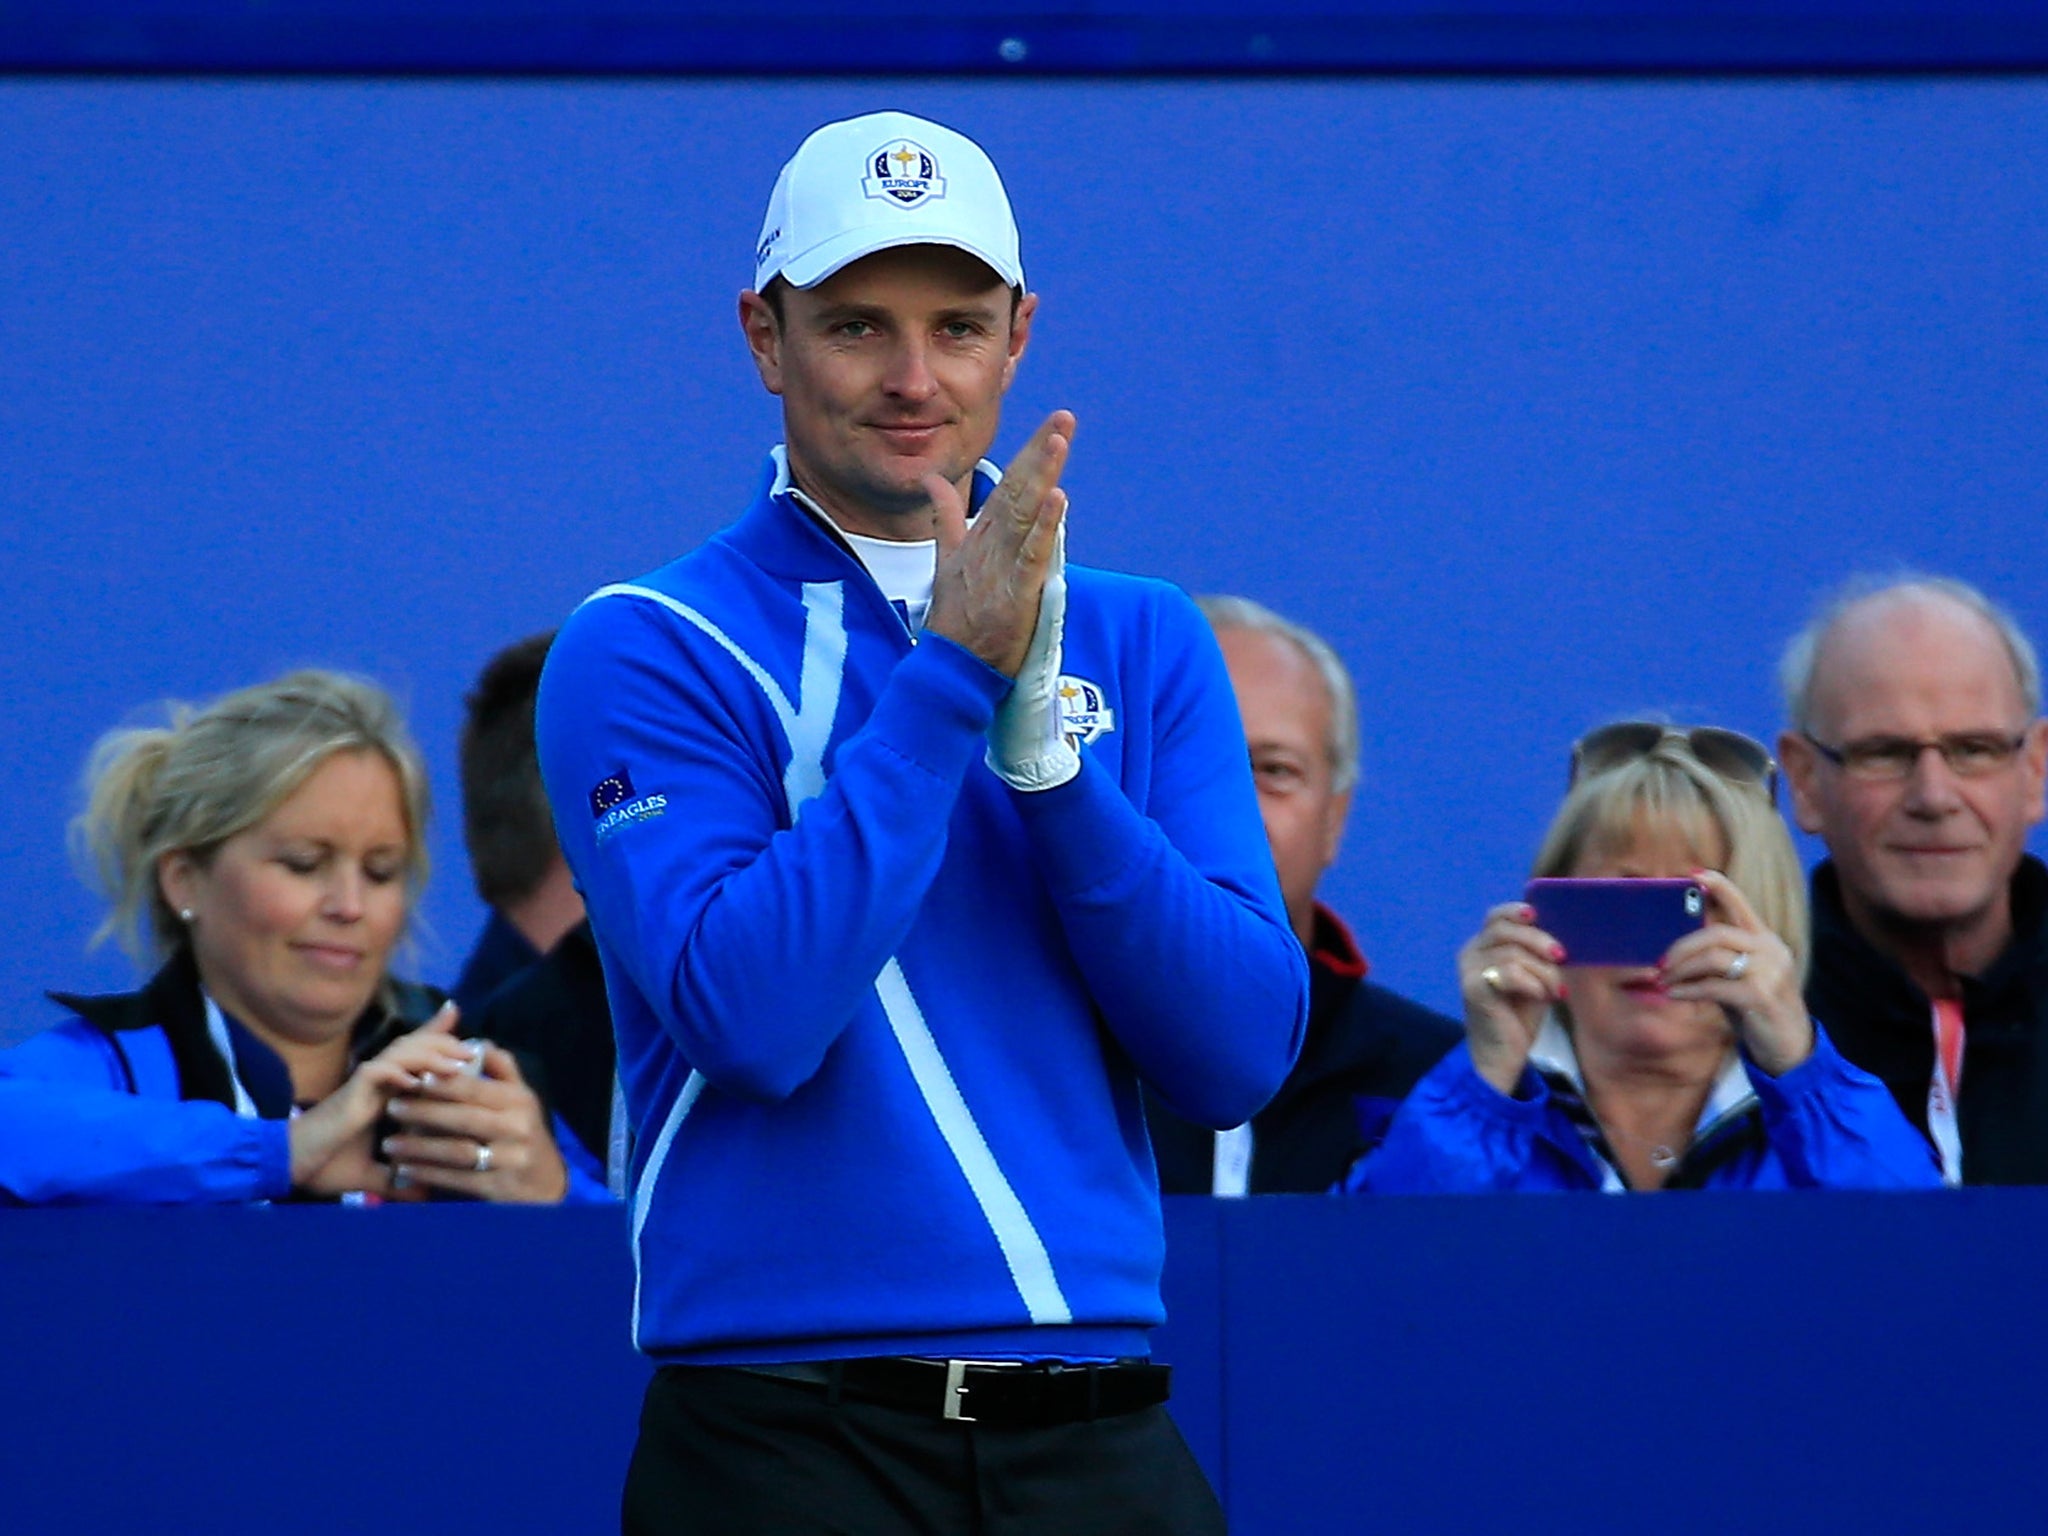 Justin Rose at the Ryder Cup